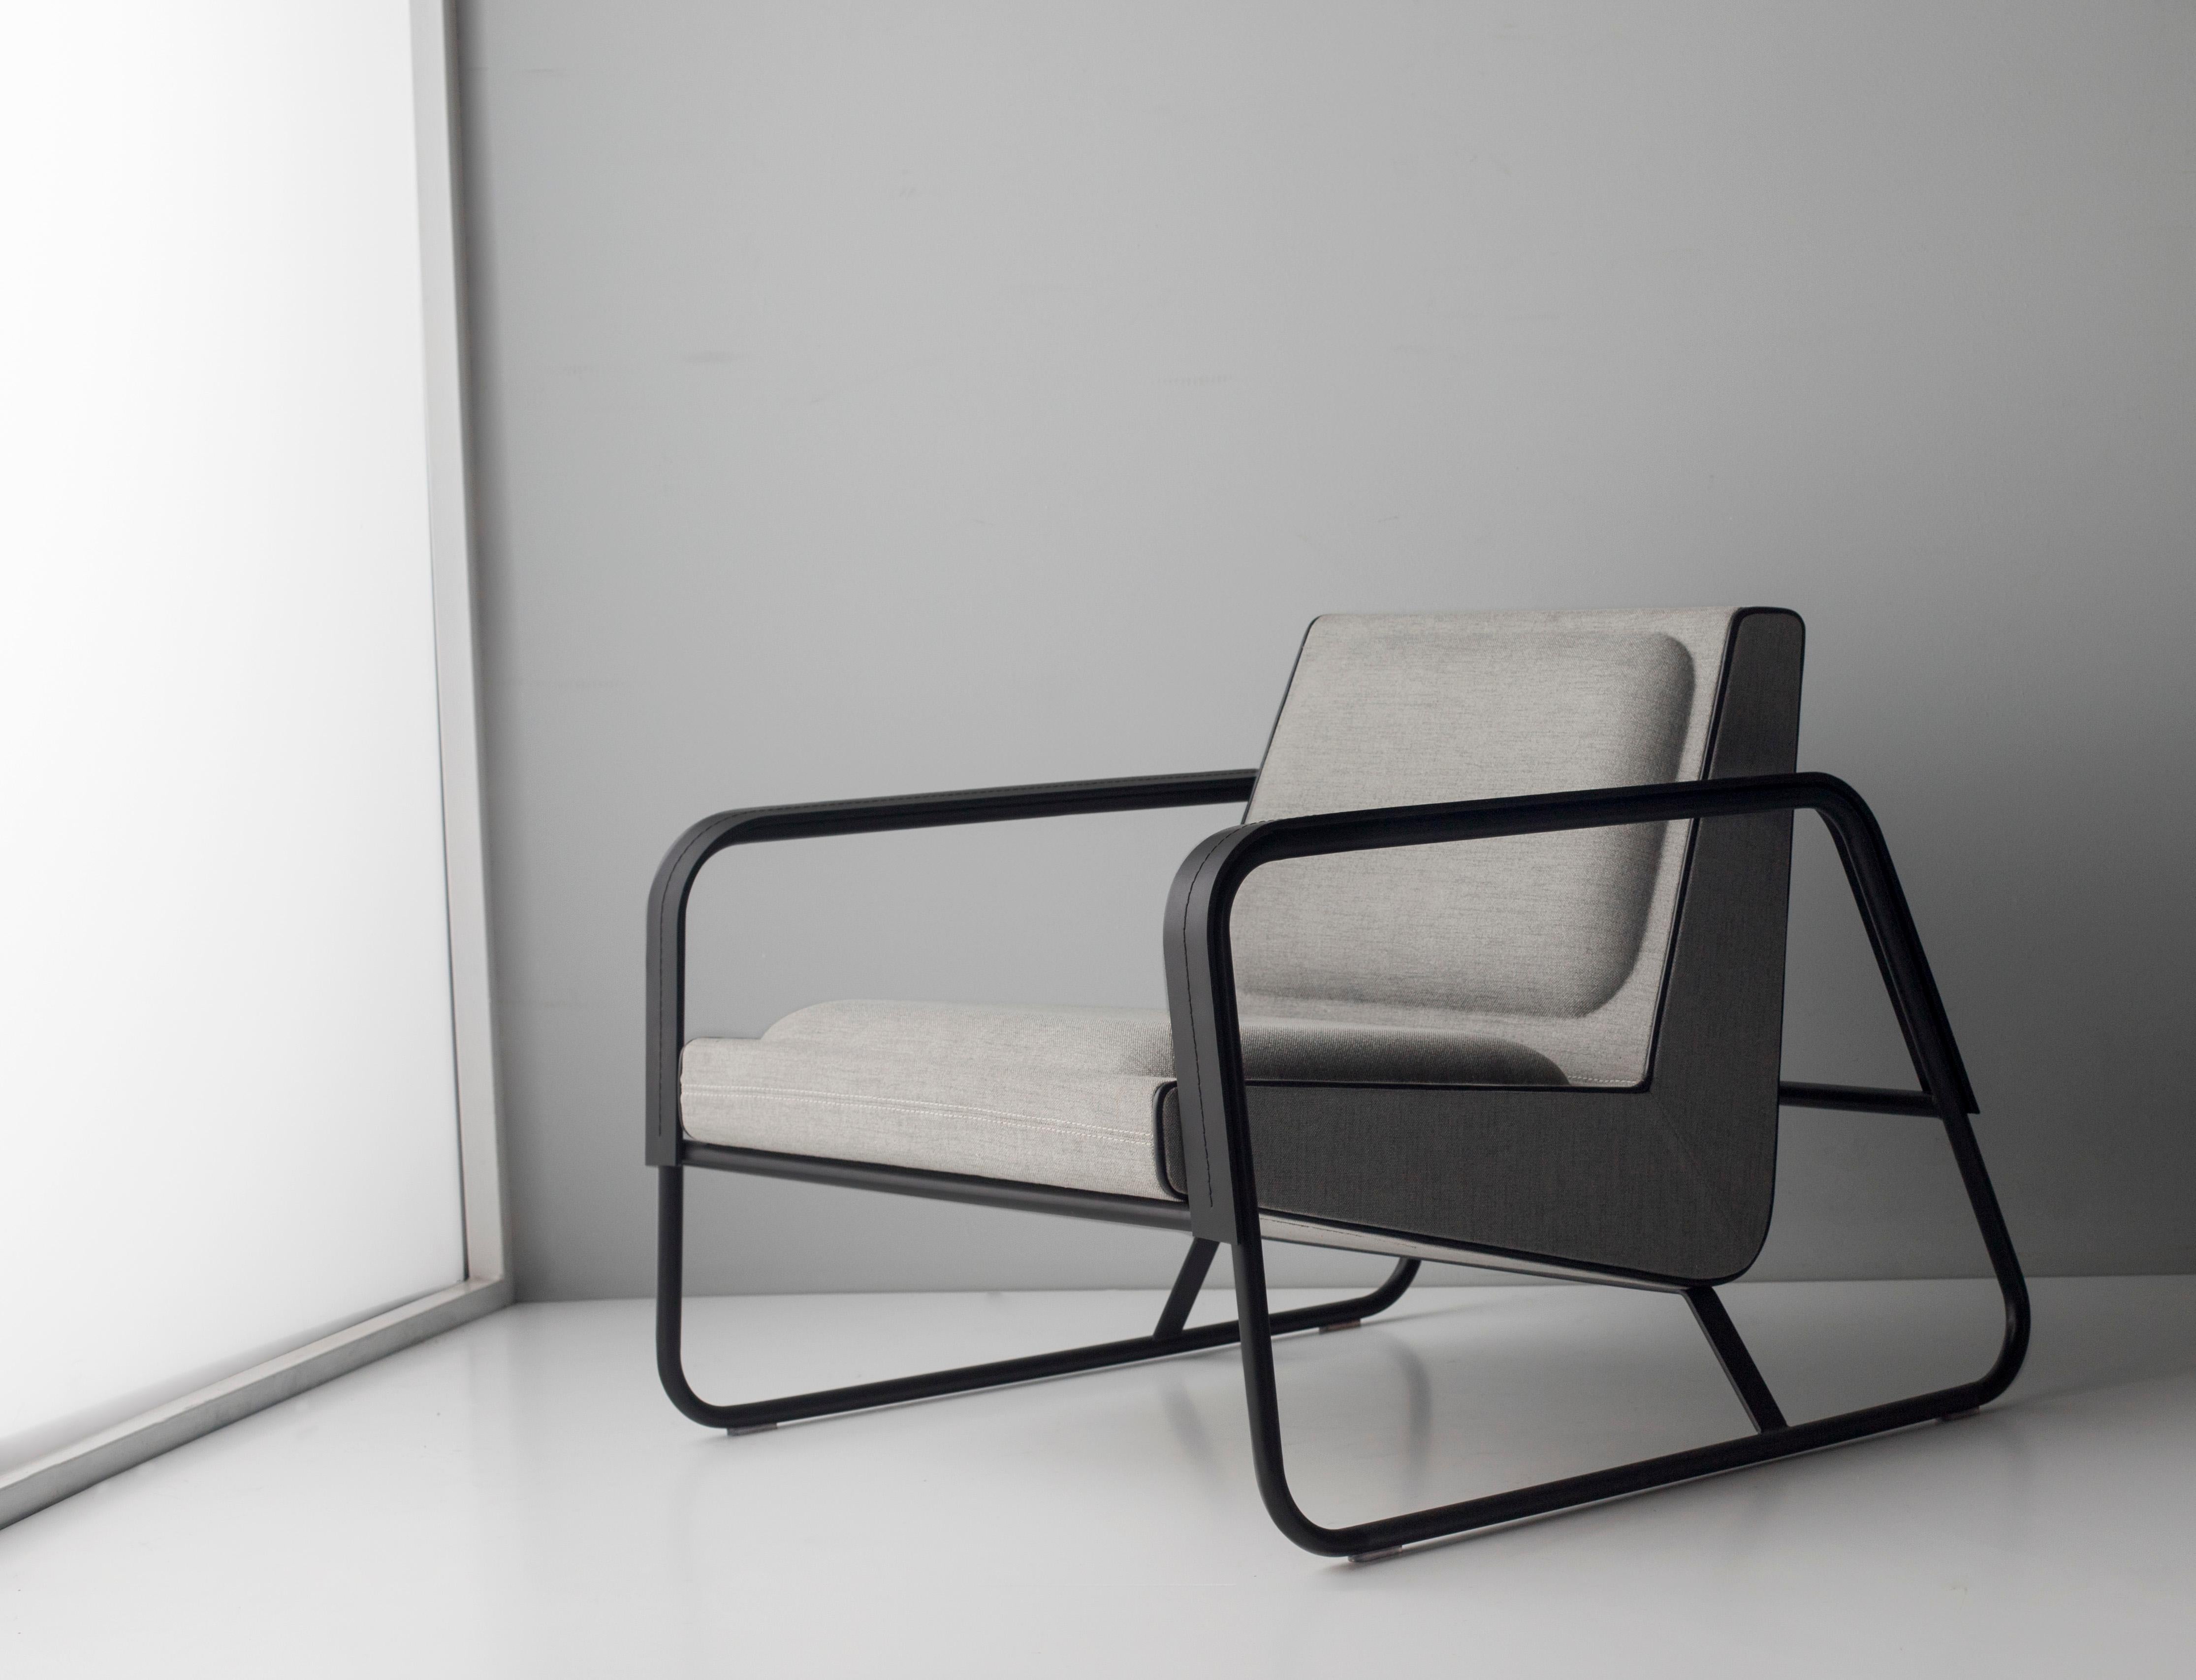 Elle Lounge Chair by Doimo Brasil
Dimensions: W 88 x D 82 x H 70 cm 
Materials: Paint, Fabric.


With the intention of providing good taste and personality, Doimo deciphers trends and follows the evolution of man and his space. To this end, it